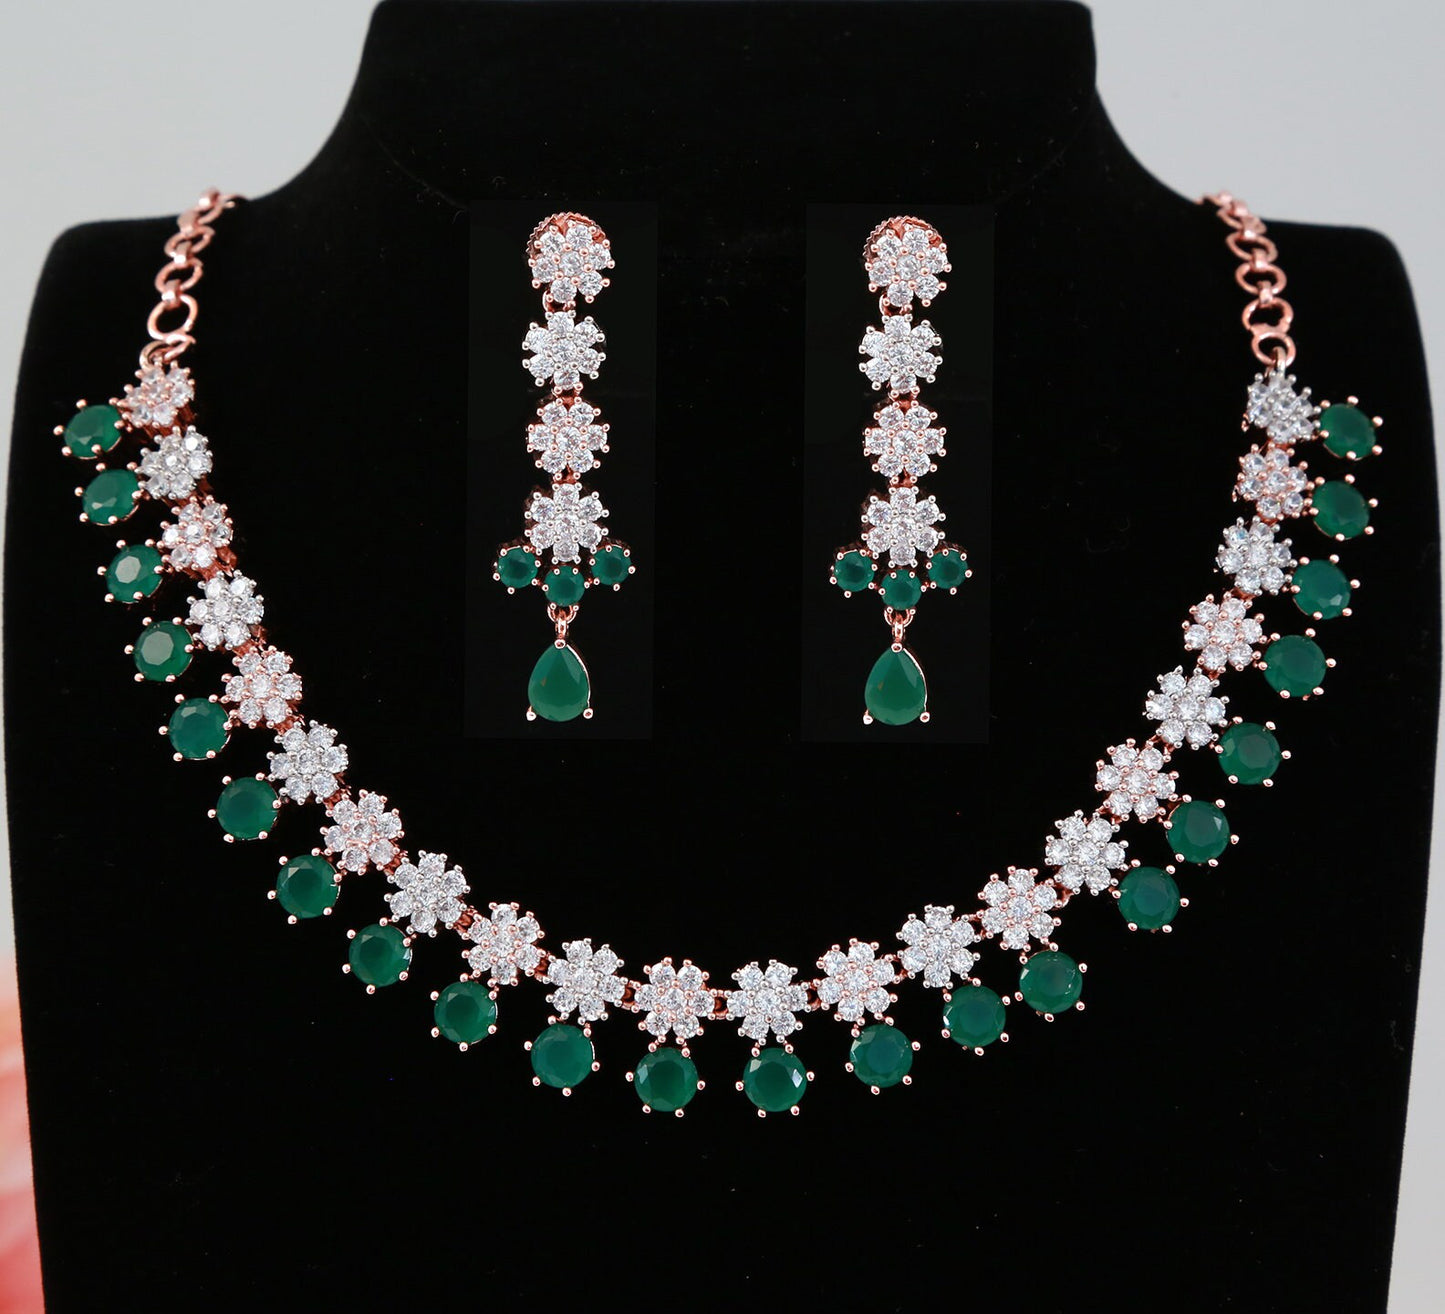 Exclusive Rose Gold American Diamond Necklace | Mint green necklace and earrings | Cz diamond necklace set | Latest Indian jewelry designs